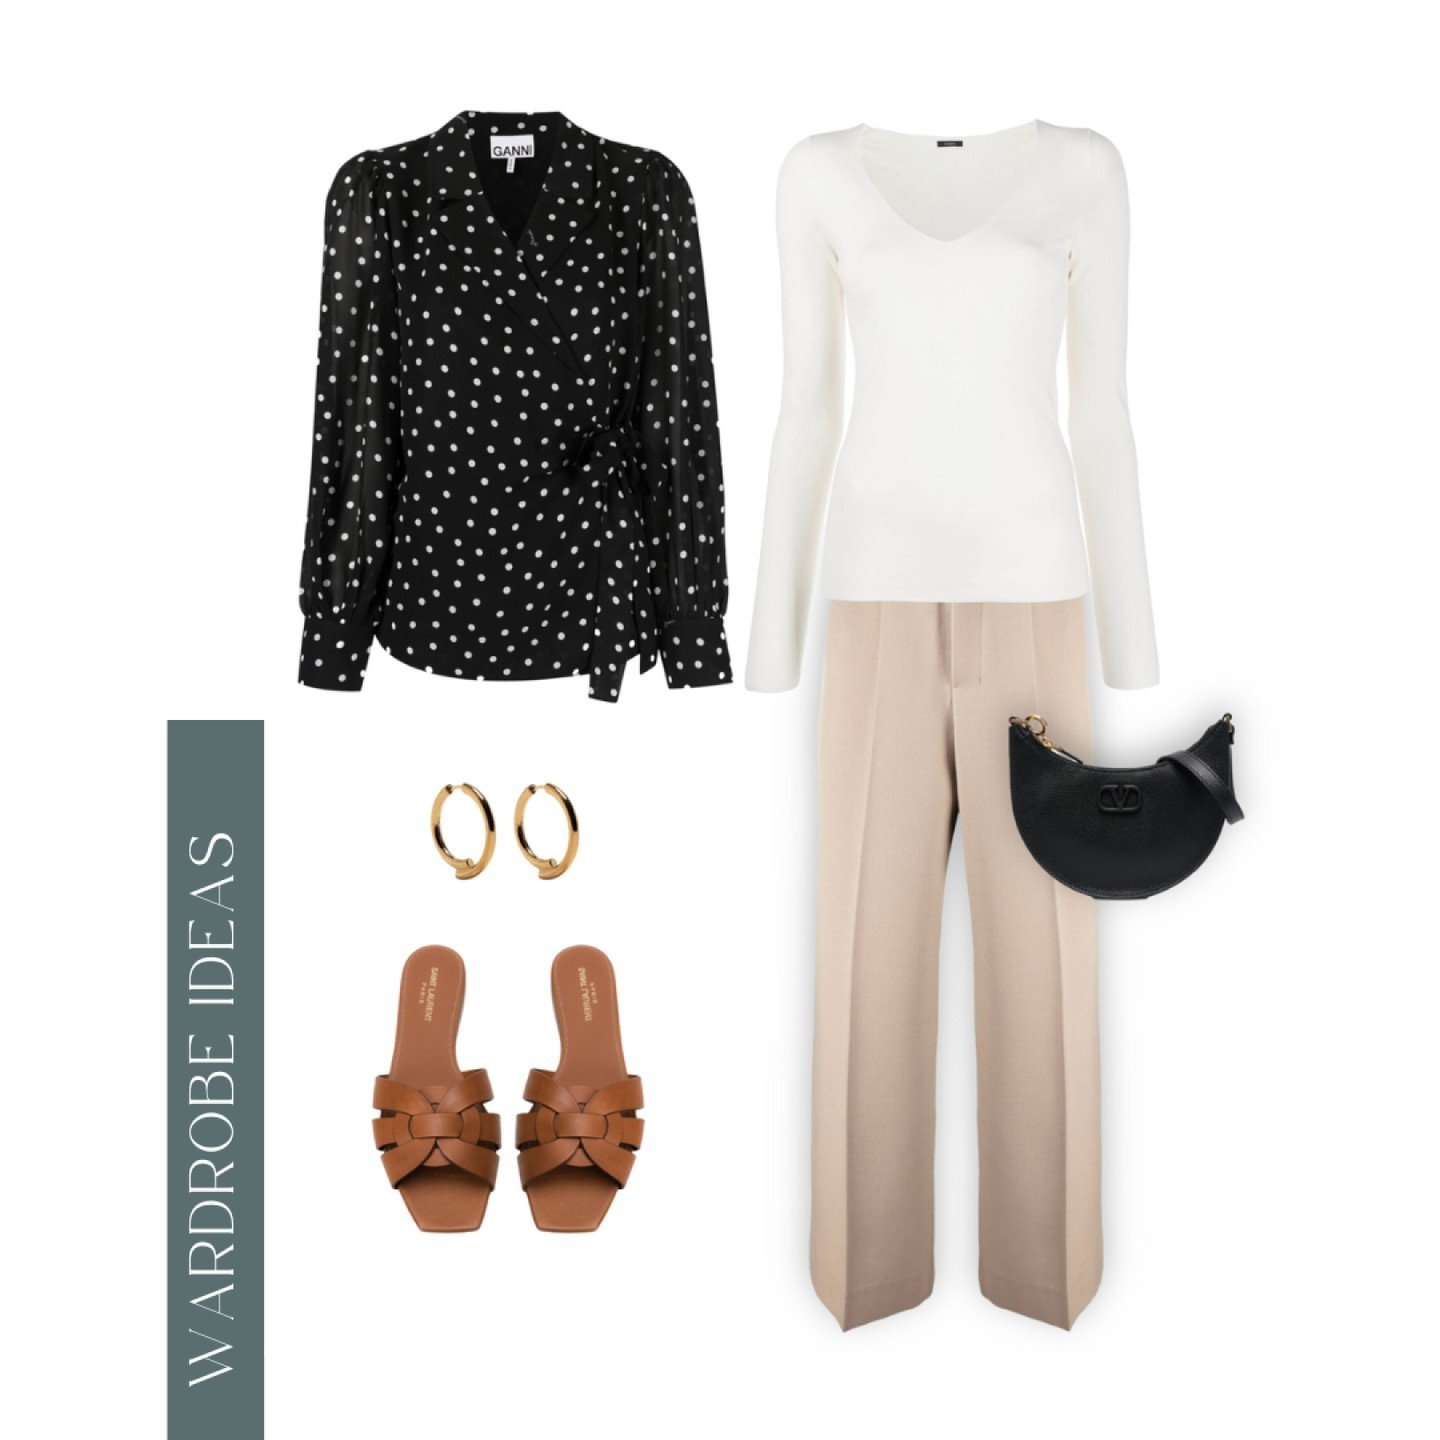 📸WARDROBE IDEAS 📸 RELAXED CORPORATE
Camel trousers and a v-neck long sleeve are a perfect combination for the woman looking for a less structured style, but still in the corporate realm. you could even throw on a blazer to elevate this look.

Anoth